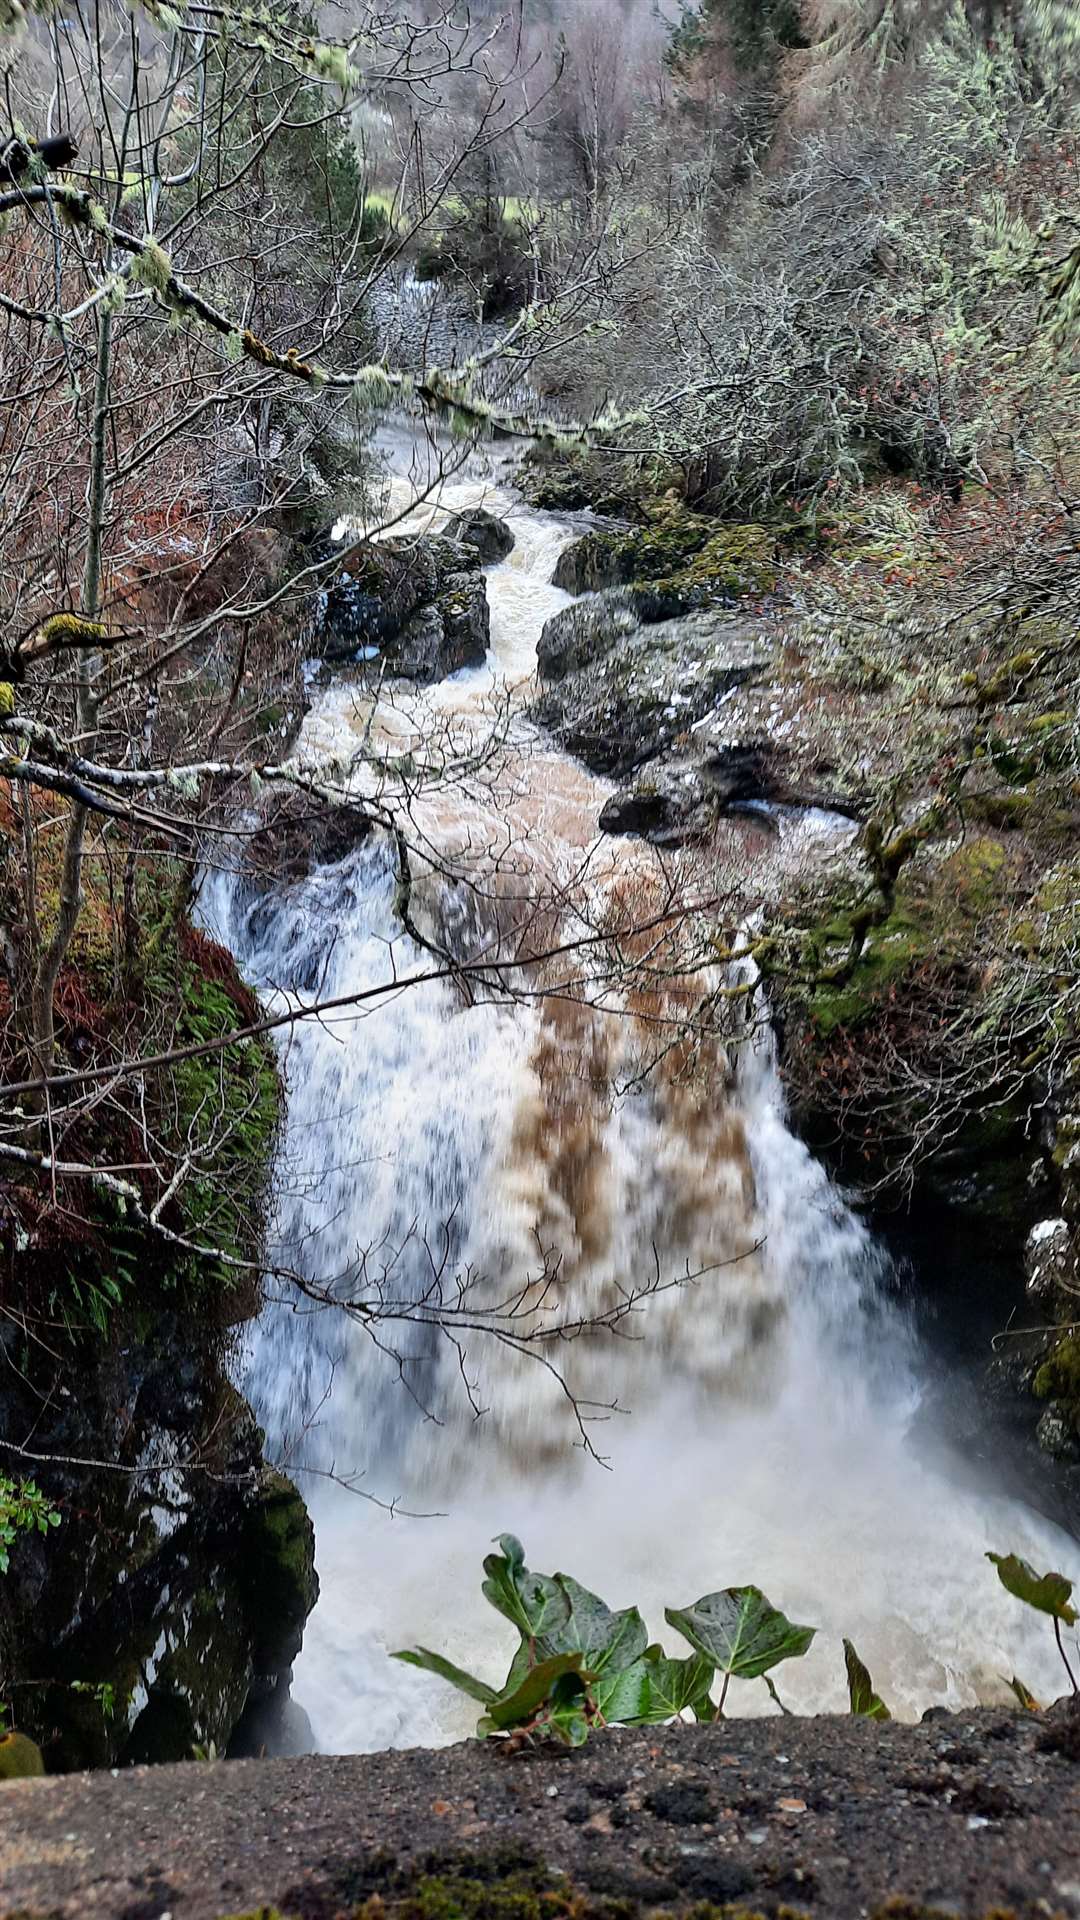 The Upper Falls at Foyers.